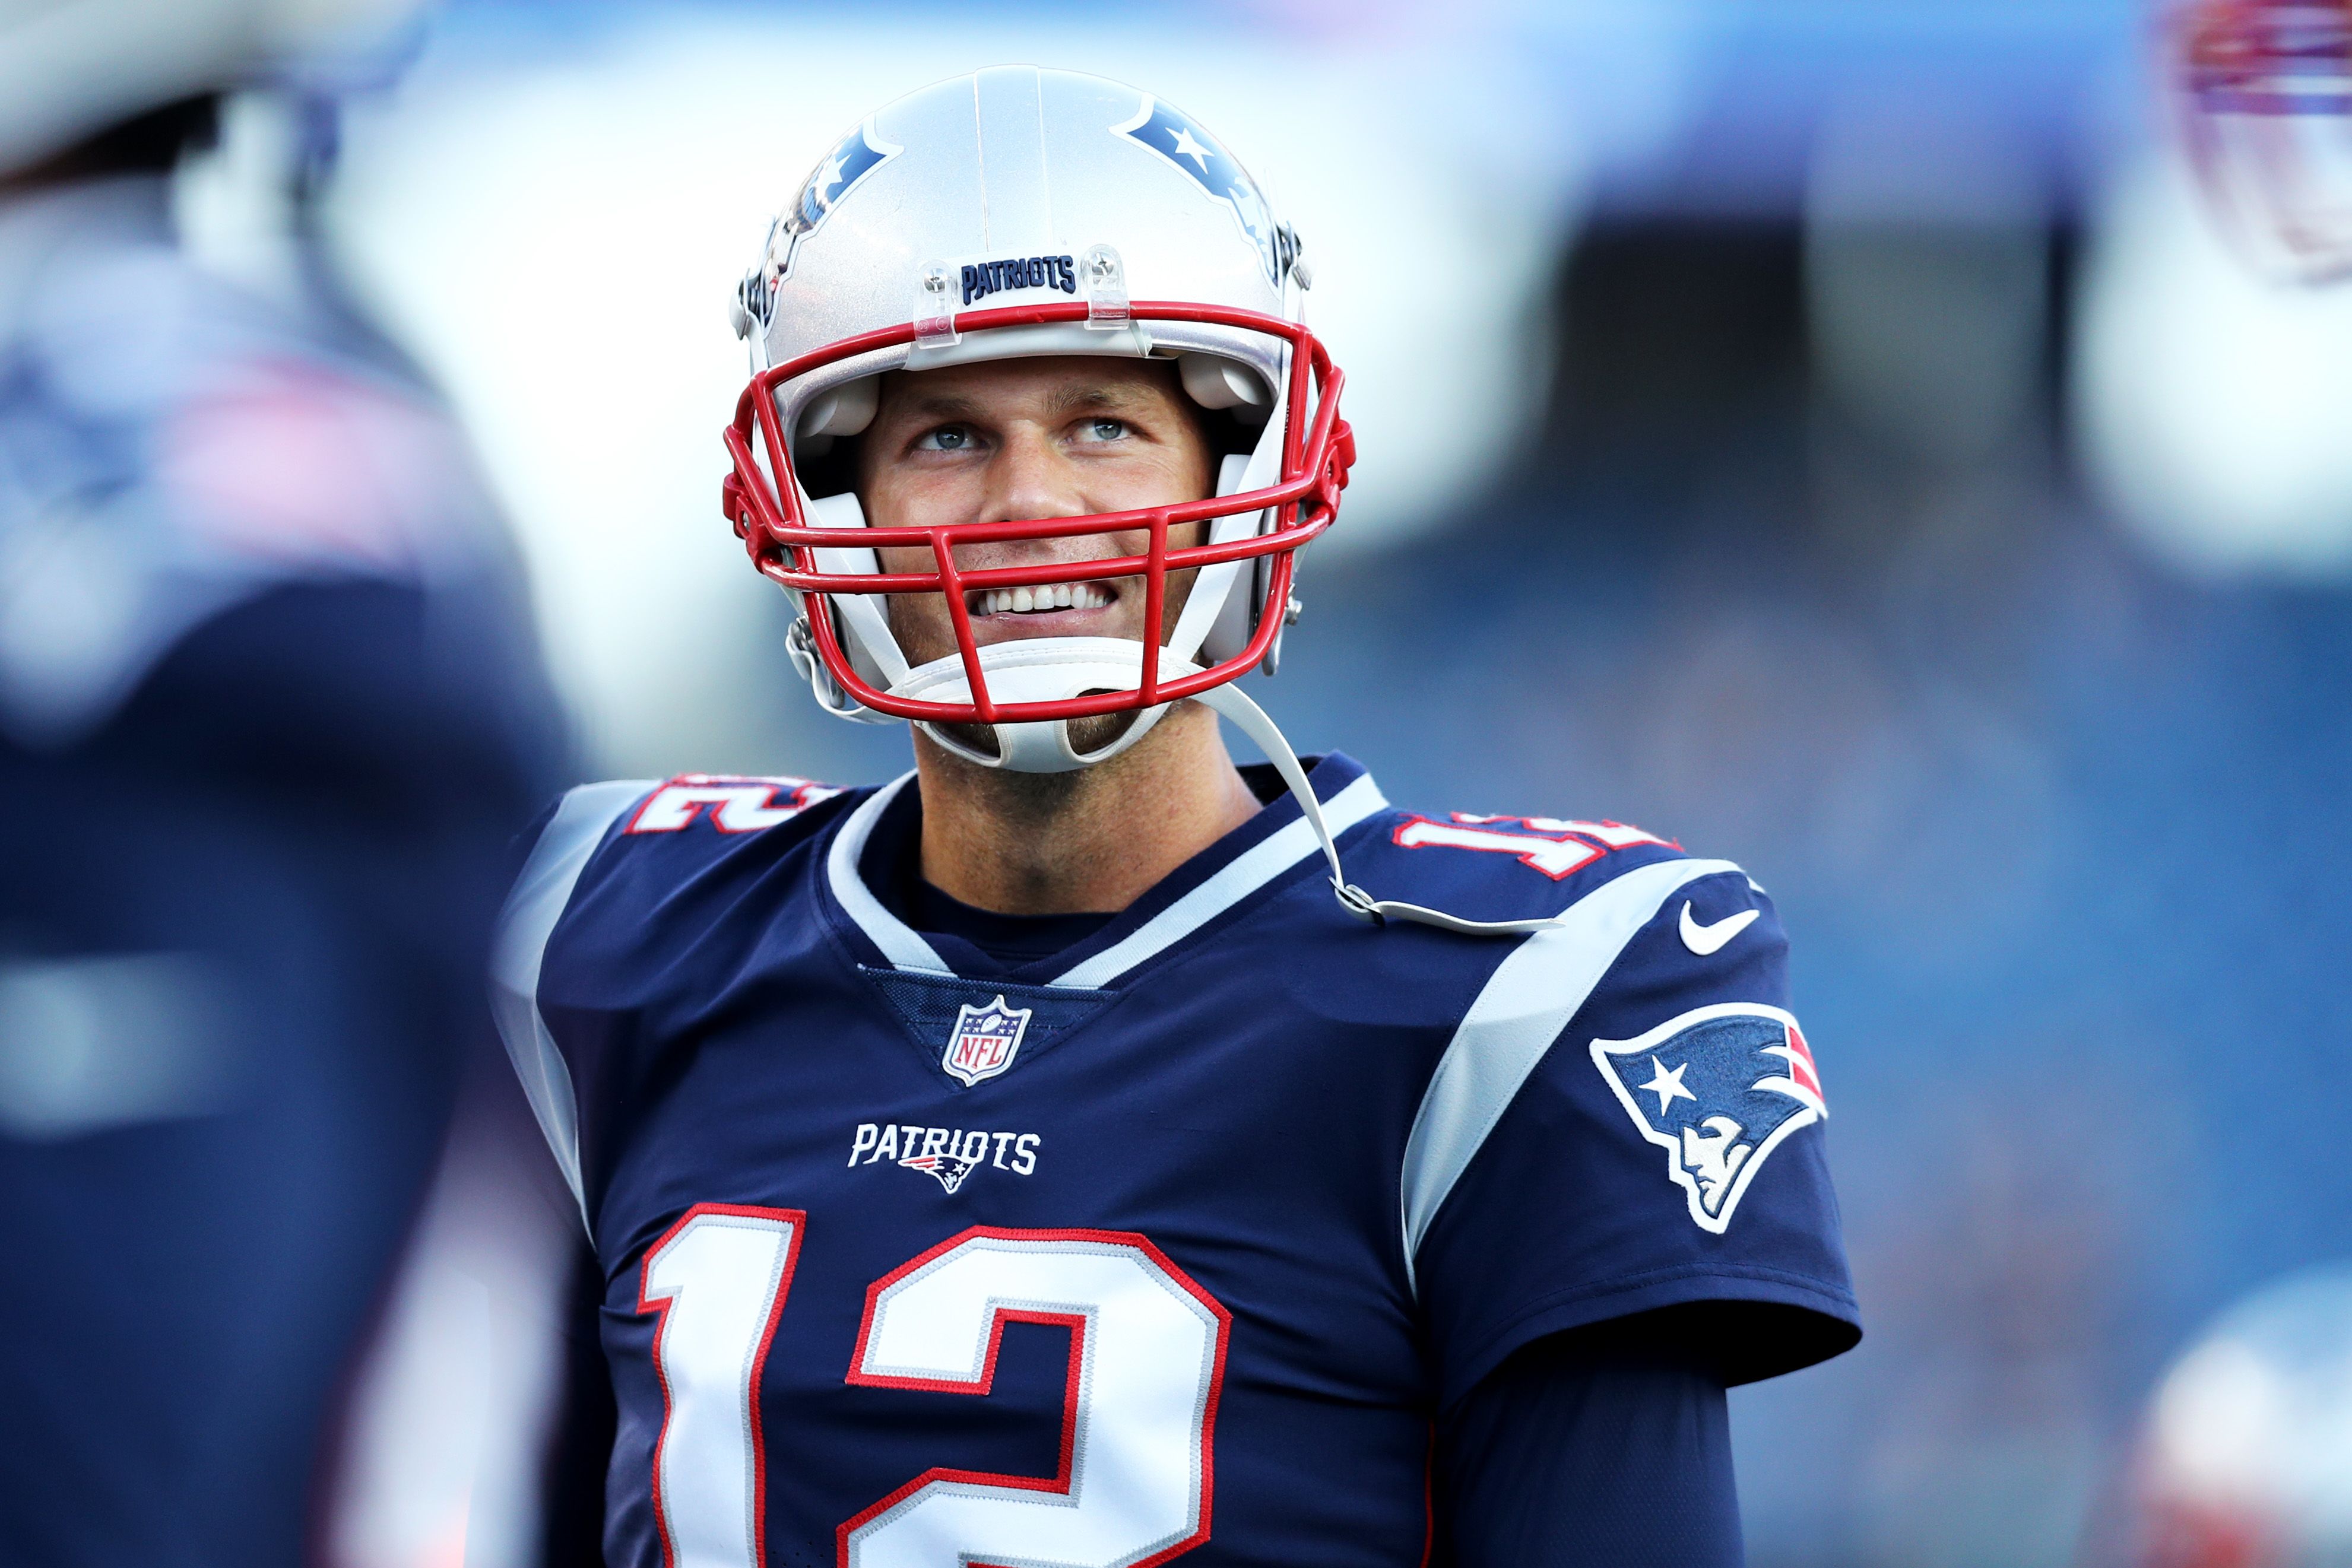 ESPN - Breaking: Tom Brady is retiring from the NFL, sources tell